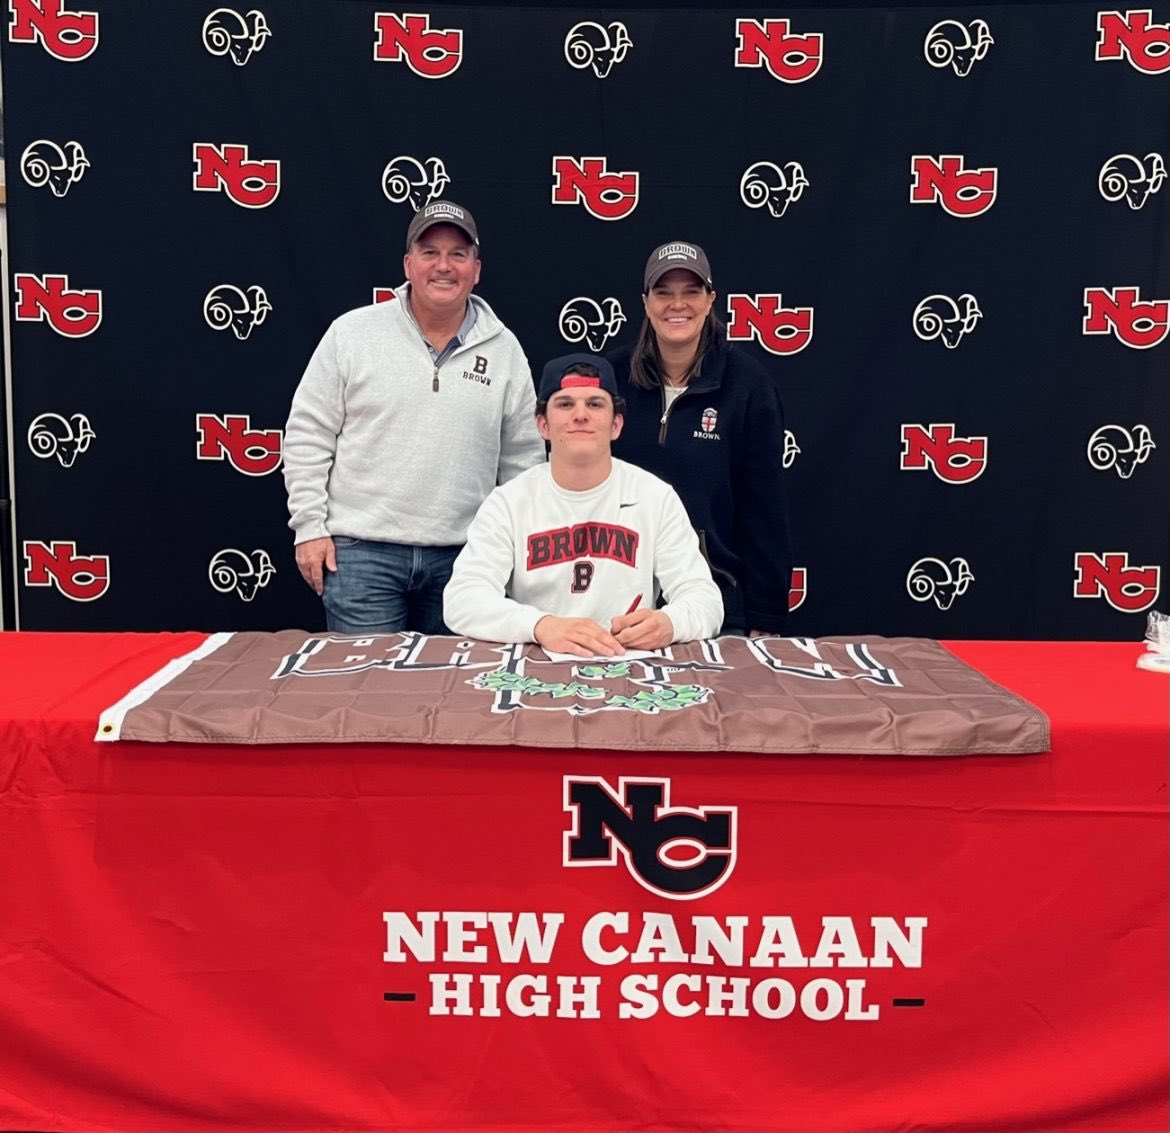 …and of course let’s not forget about Alex Benevento who signed to play baseball at Brown this past fall and is having an AWESOME senior year.